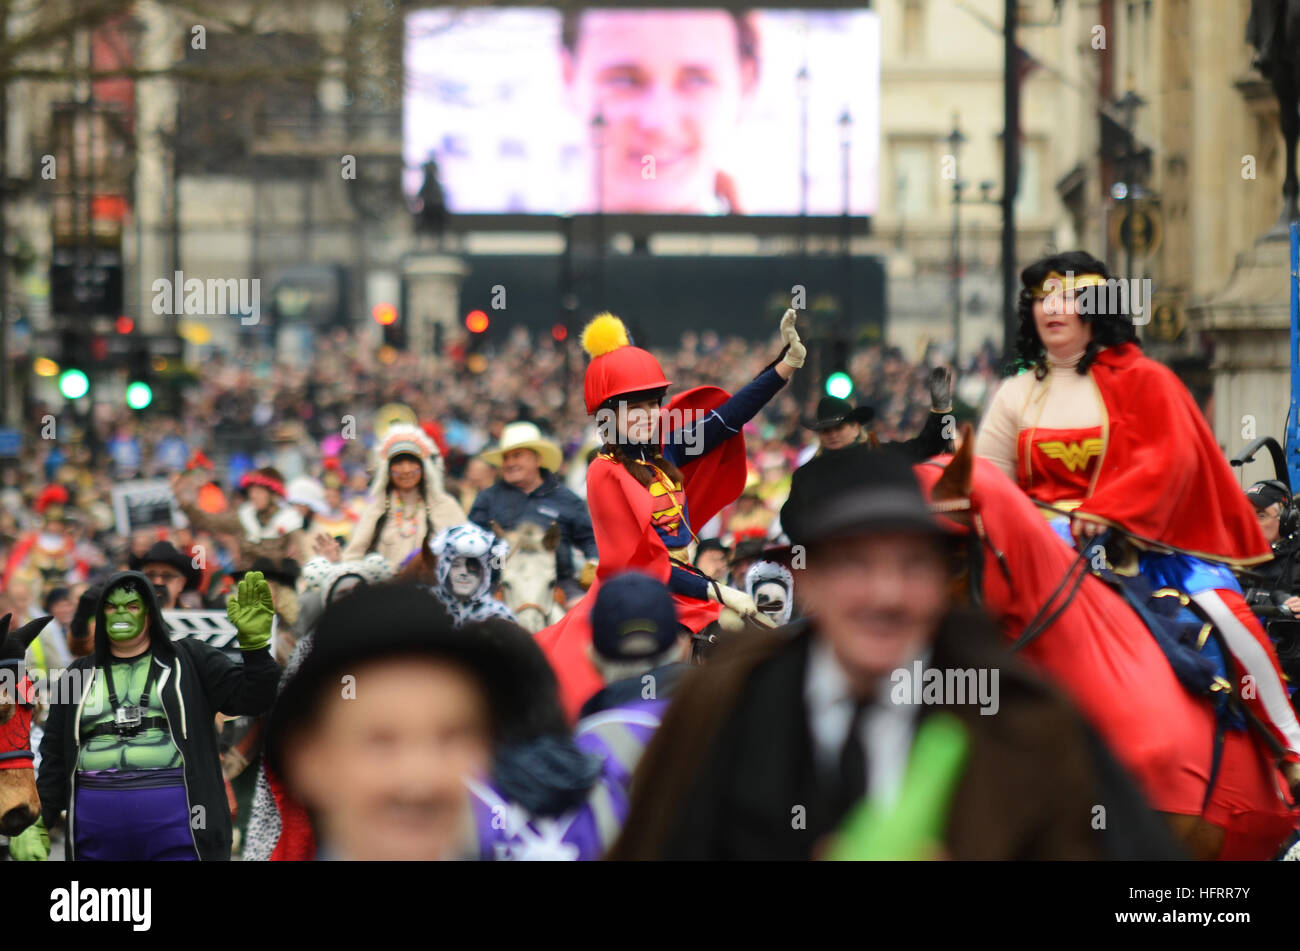 Focusing on a young girl dressed in a 'Super' costume amongst a group of film characters in London's New Year's Day Parade 2017 Stock Photo